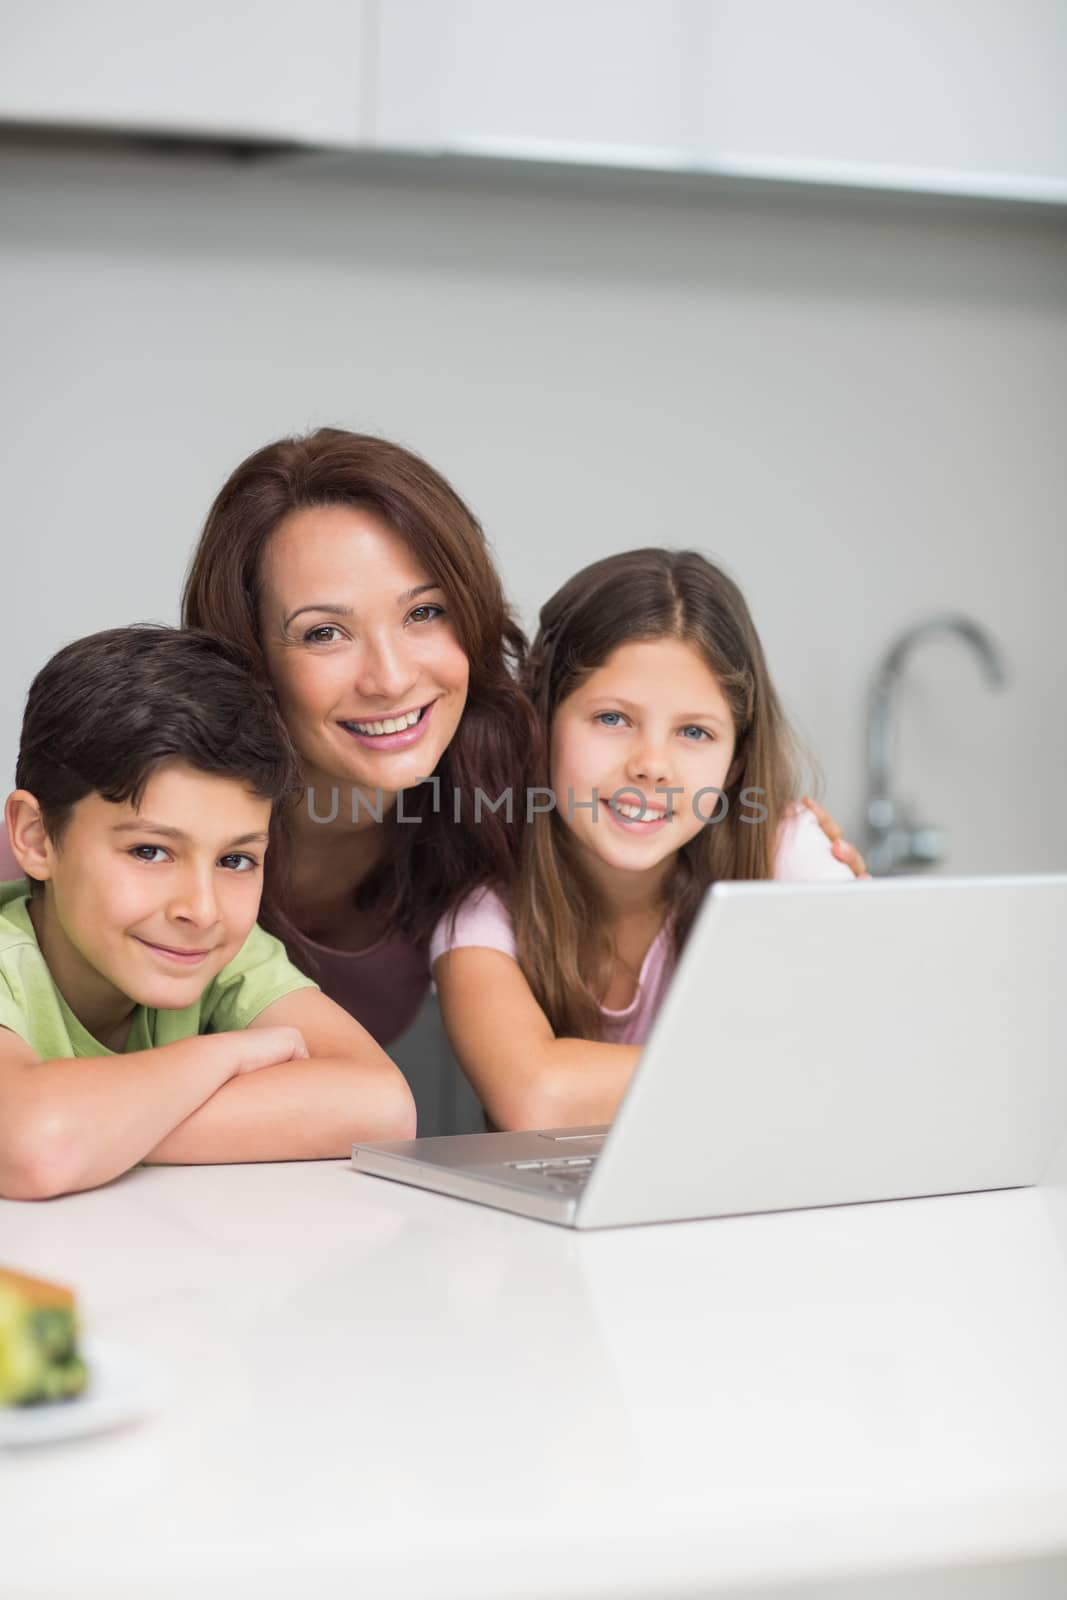 Smiling mother with kids using laptop in kitchen by Wavebreakmedia